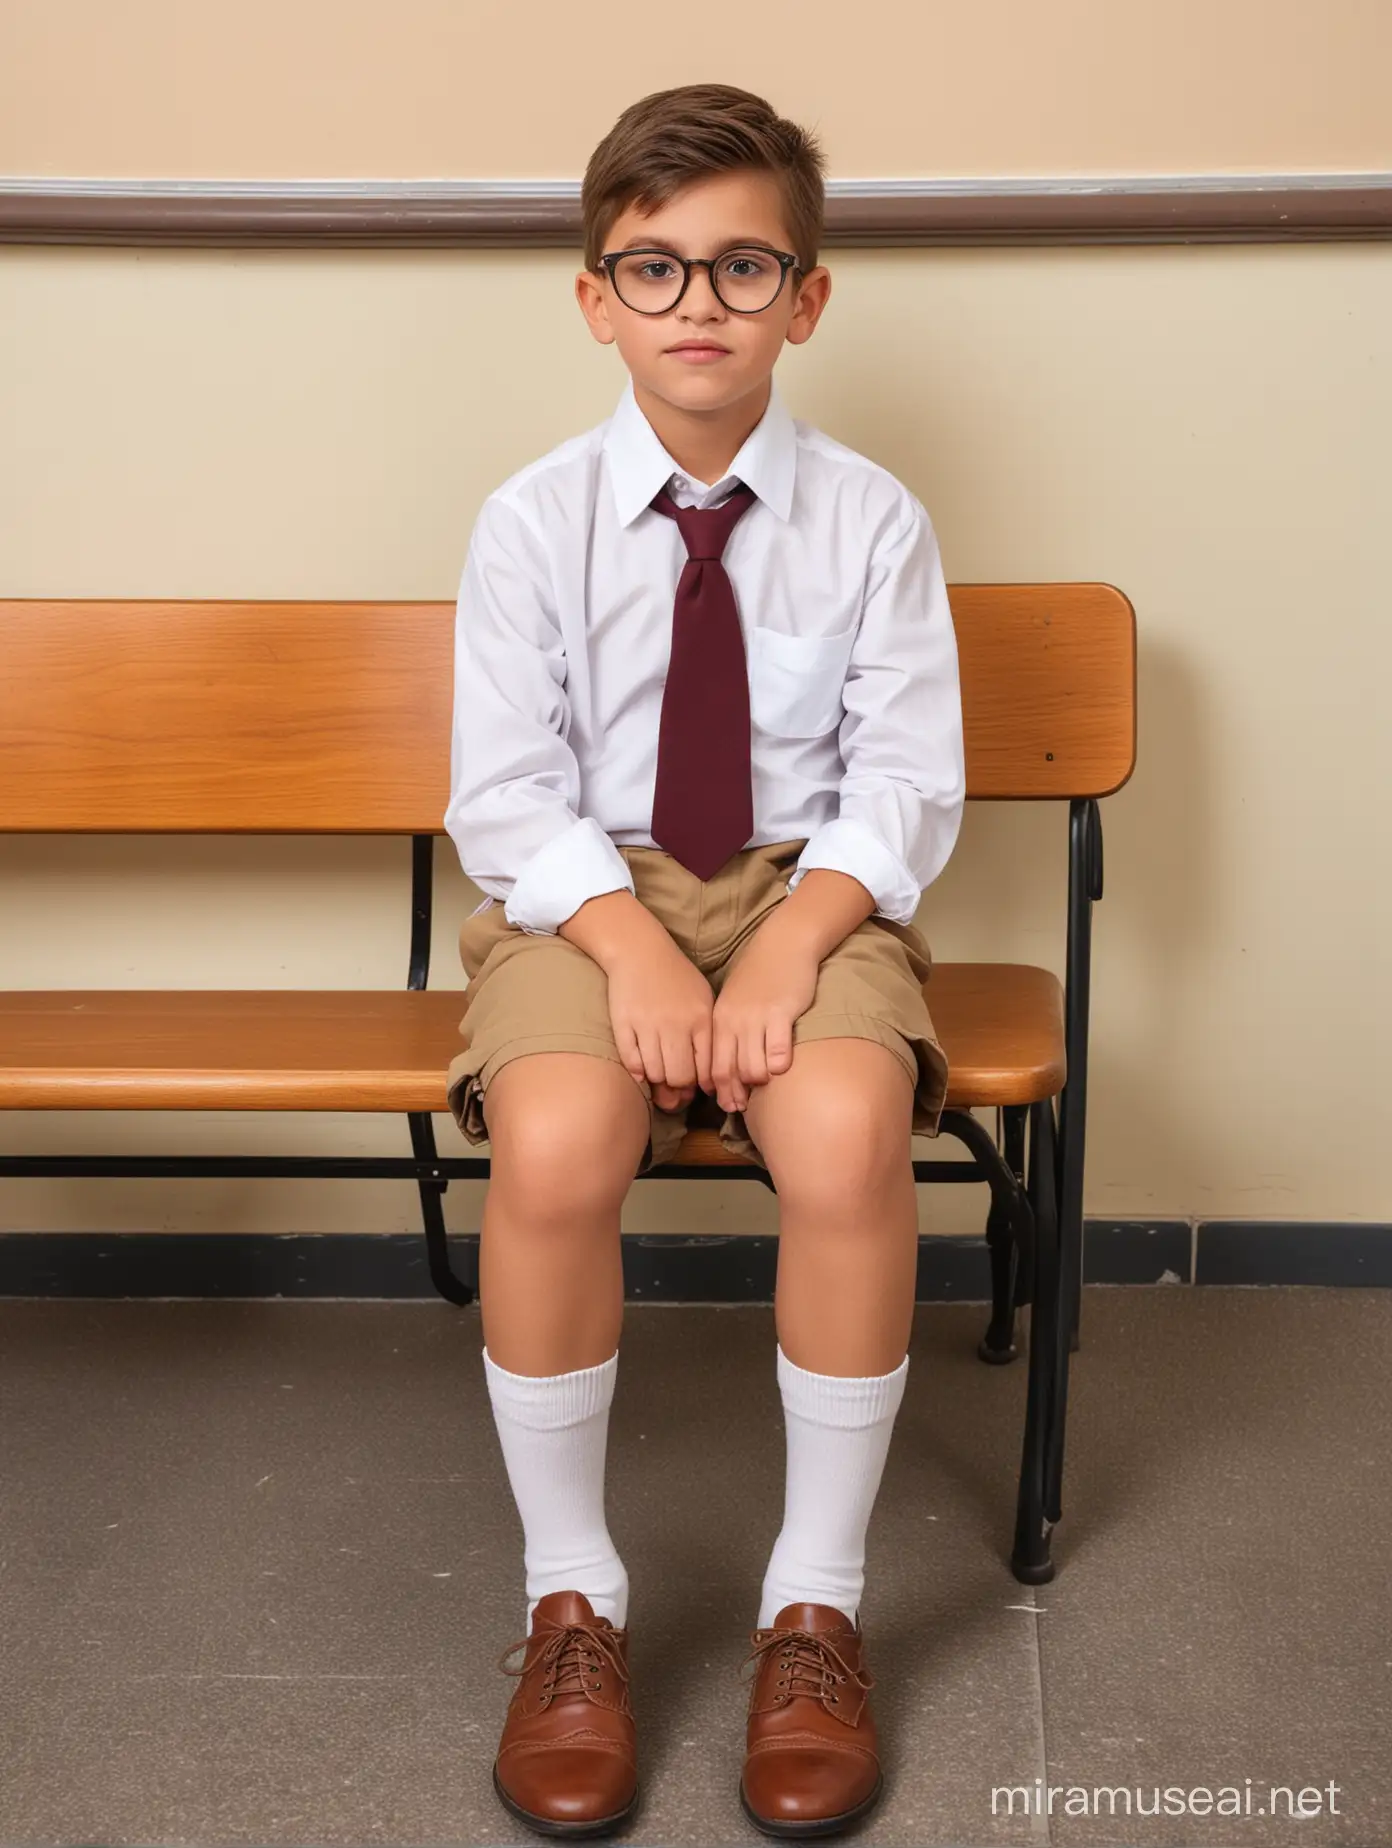 Old Fashioned Child Sitting in School with Large Socks and Glasses